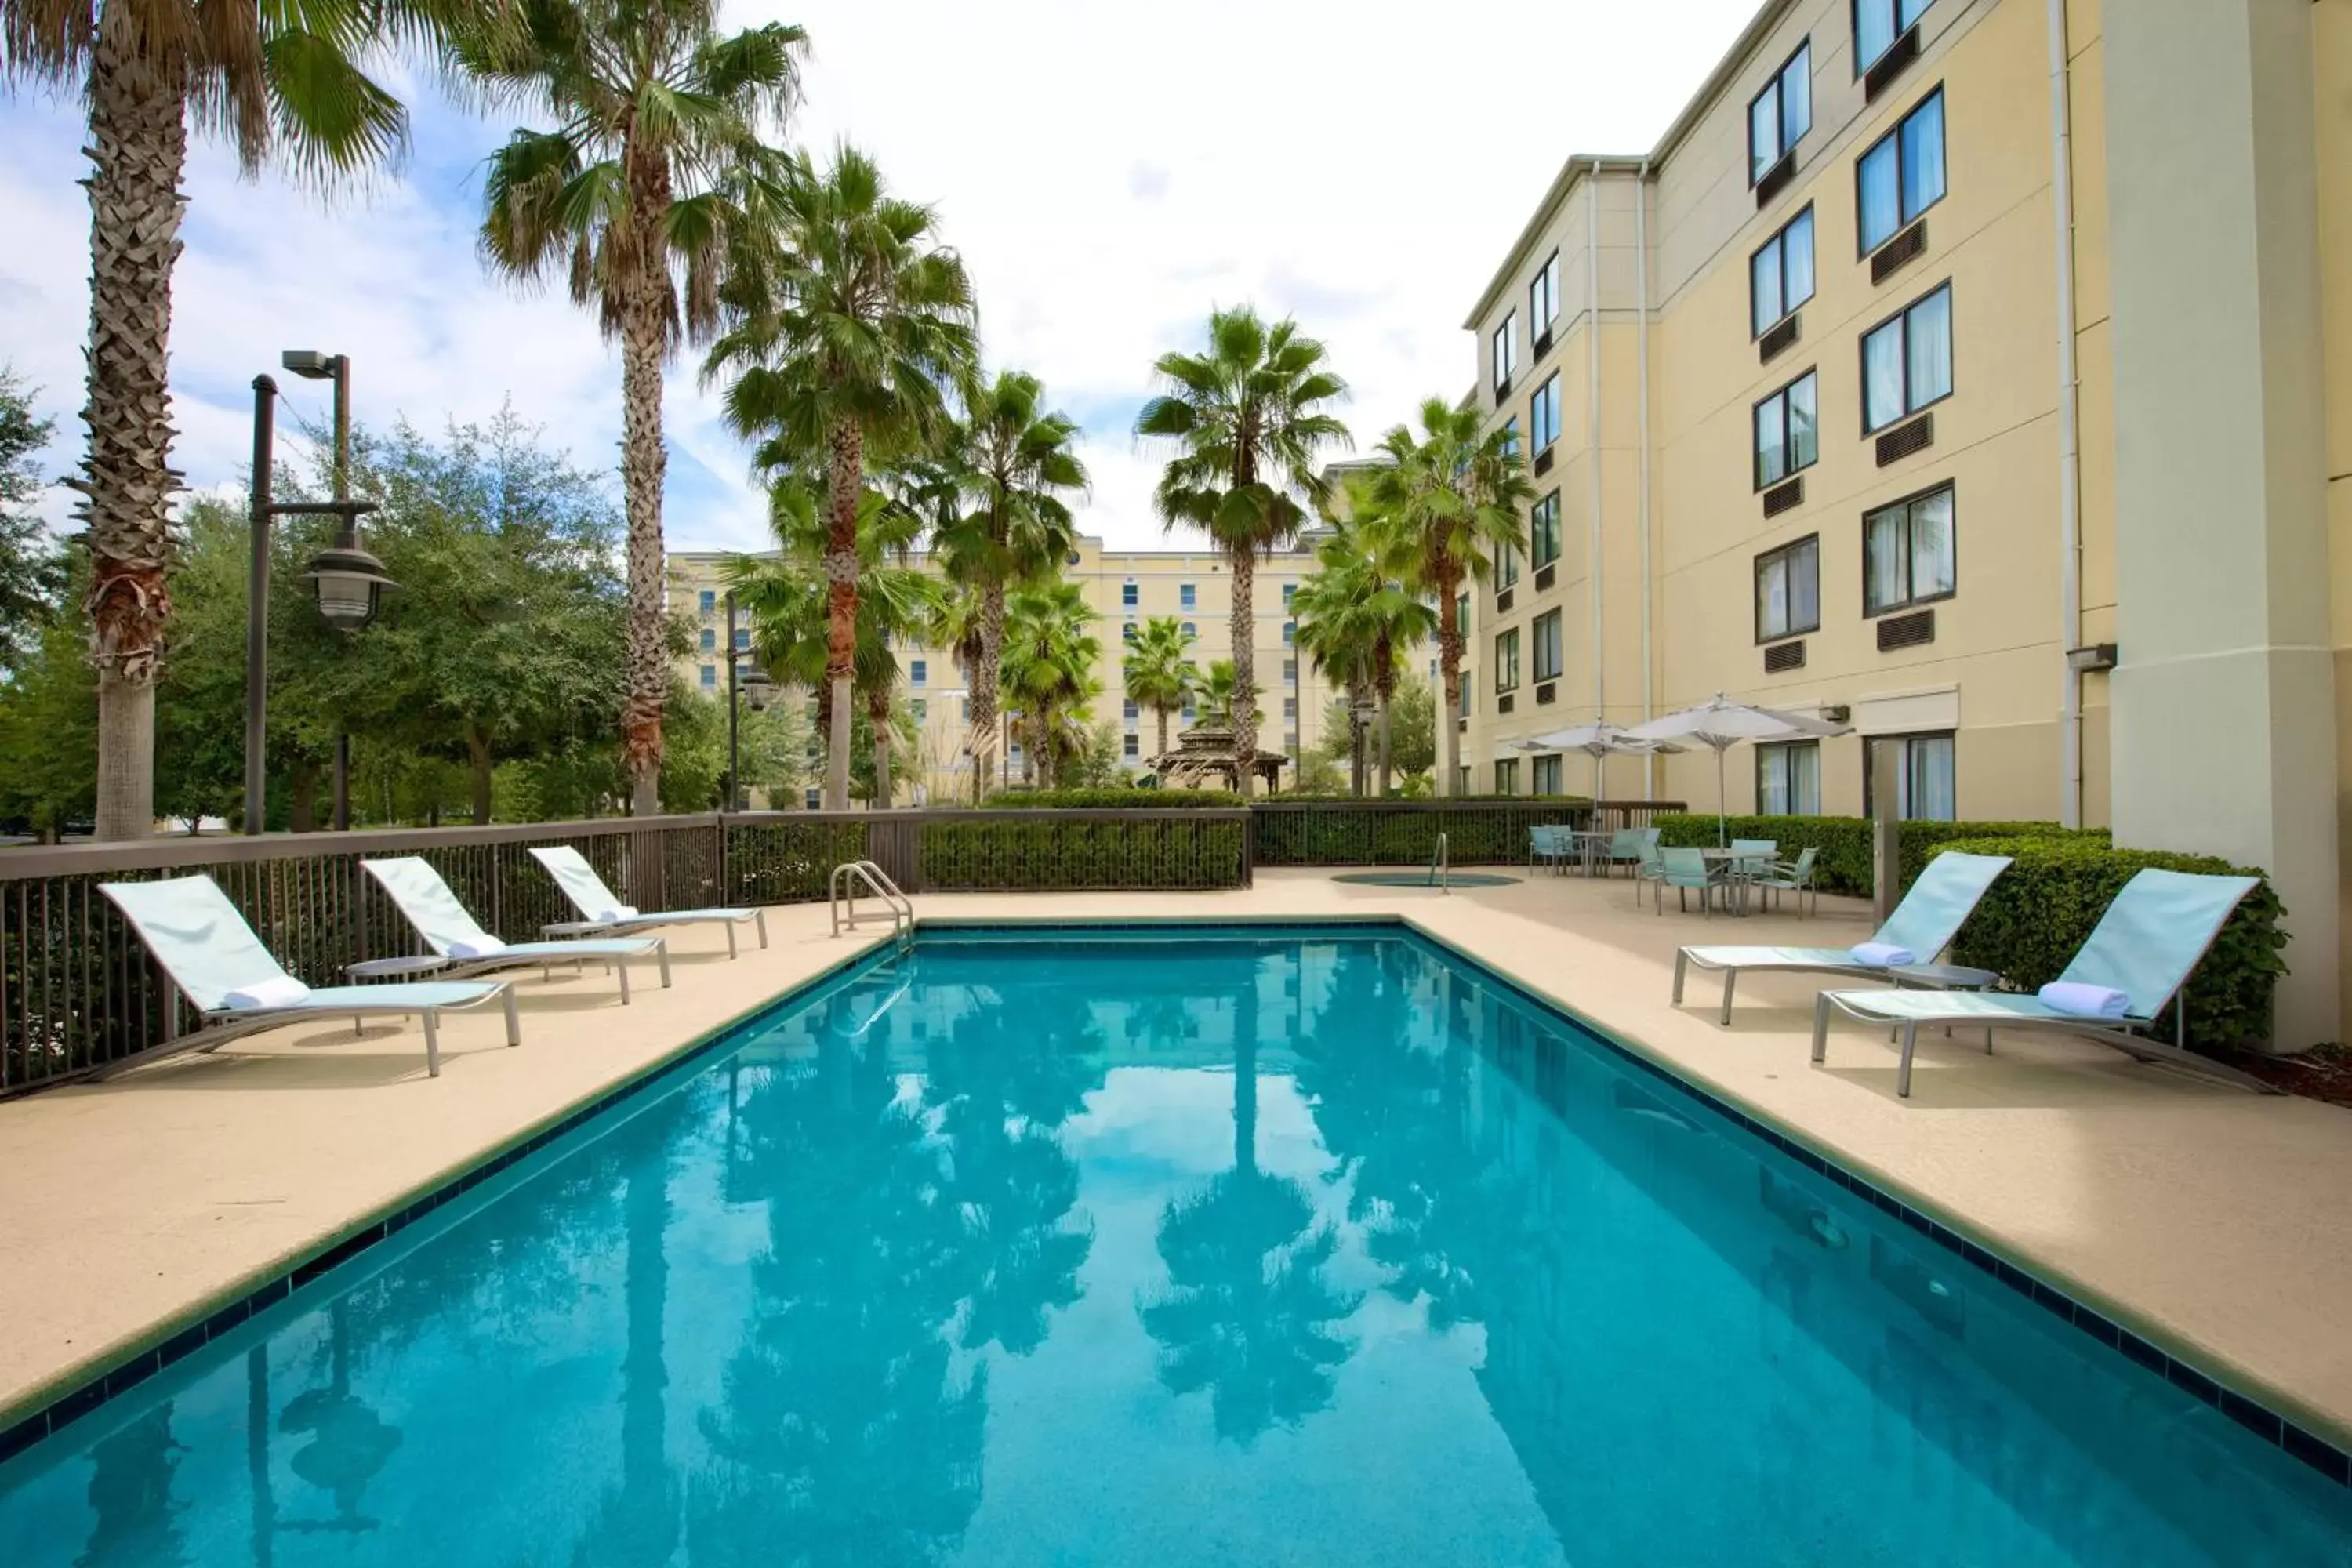 Swimming Pool in Springhill Suites Jacksonville